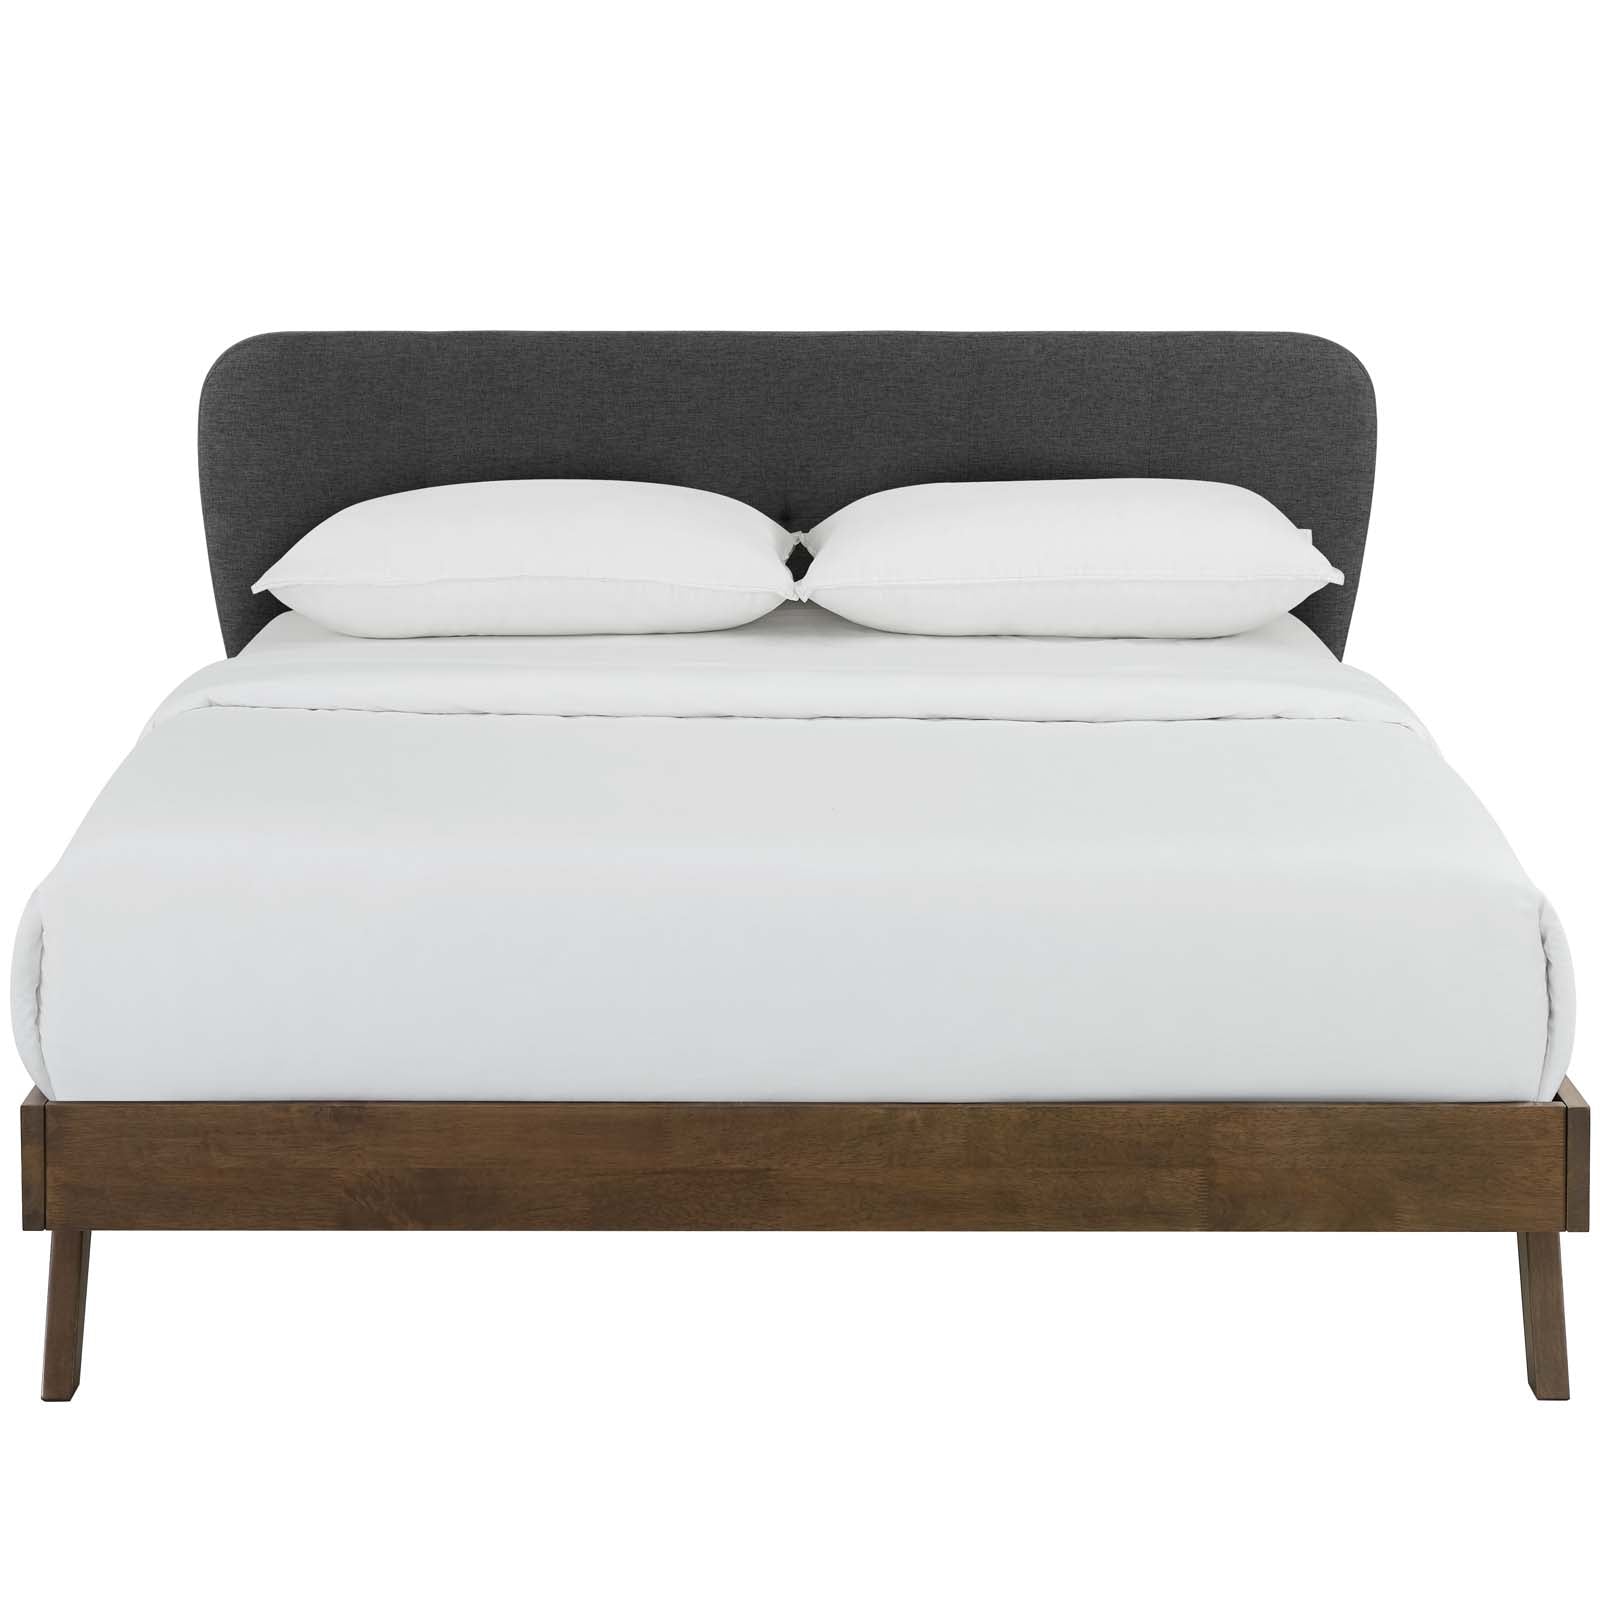 Modway Beds - Gianna Queen Upholstered Platform Bed Gray